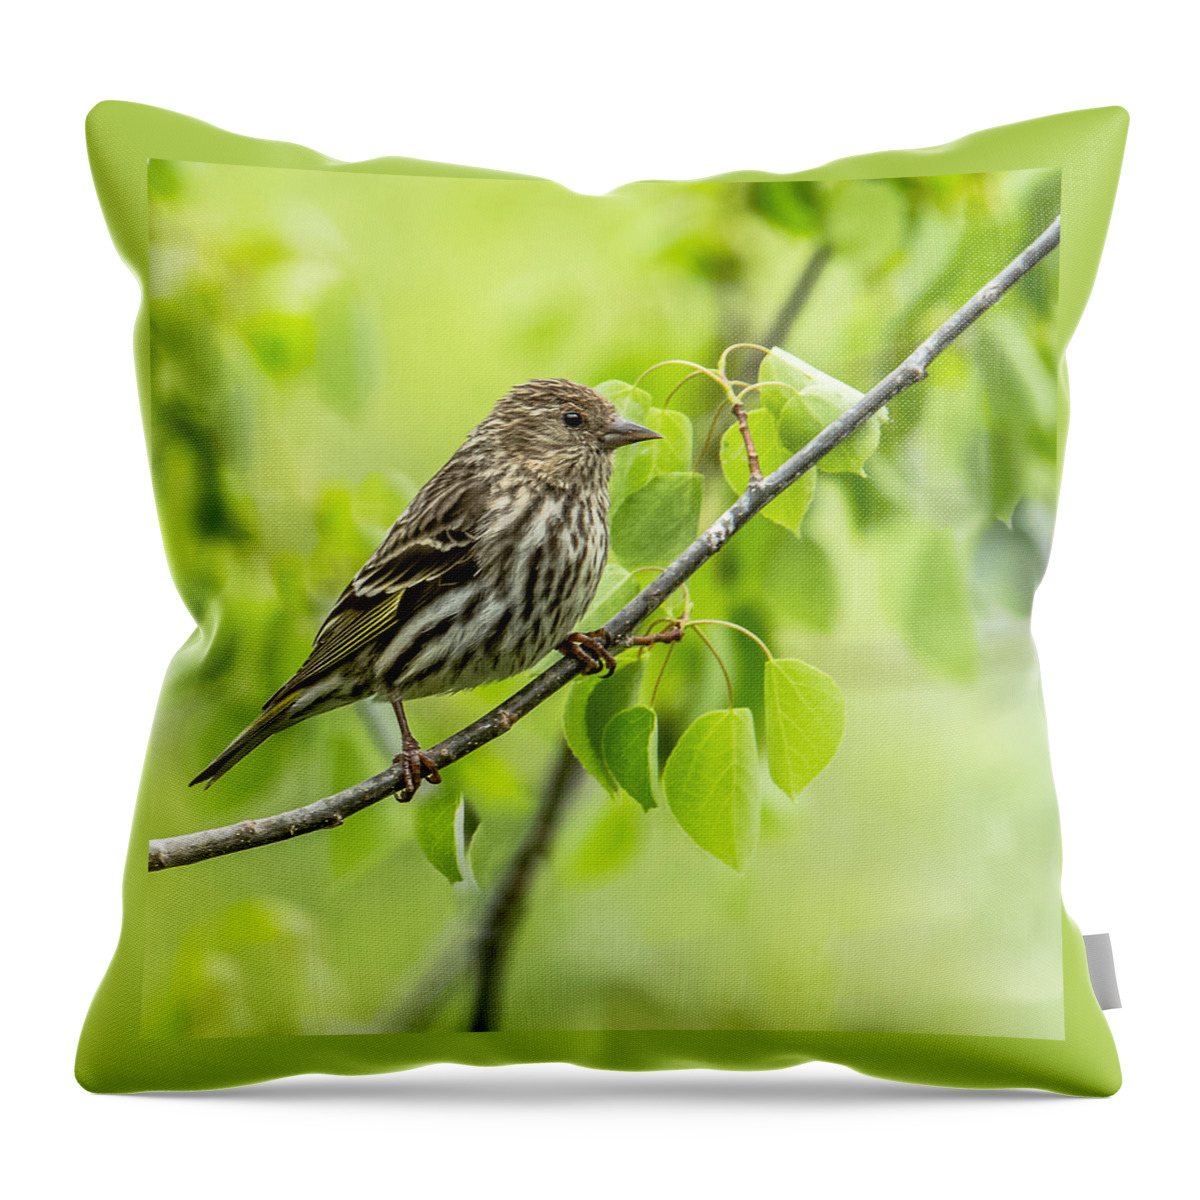 Finch Throw Pillow featuring the photograph Pine Siskin On A Branch by Yeates Photography